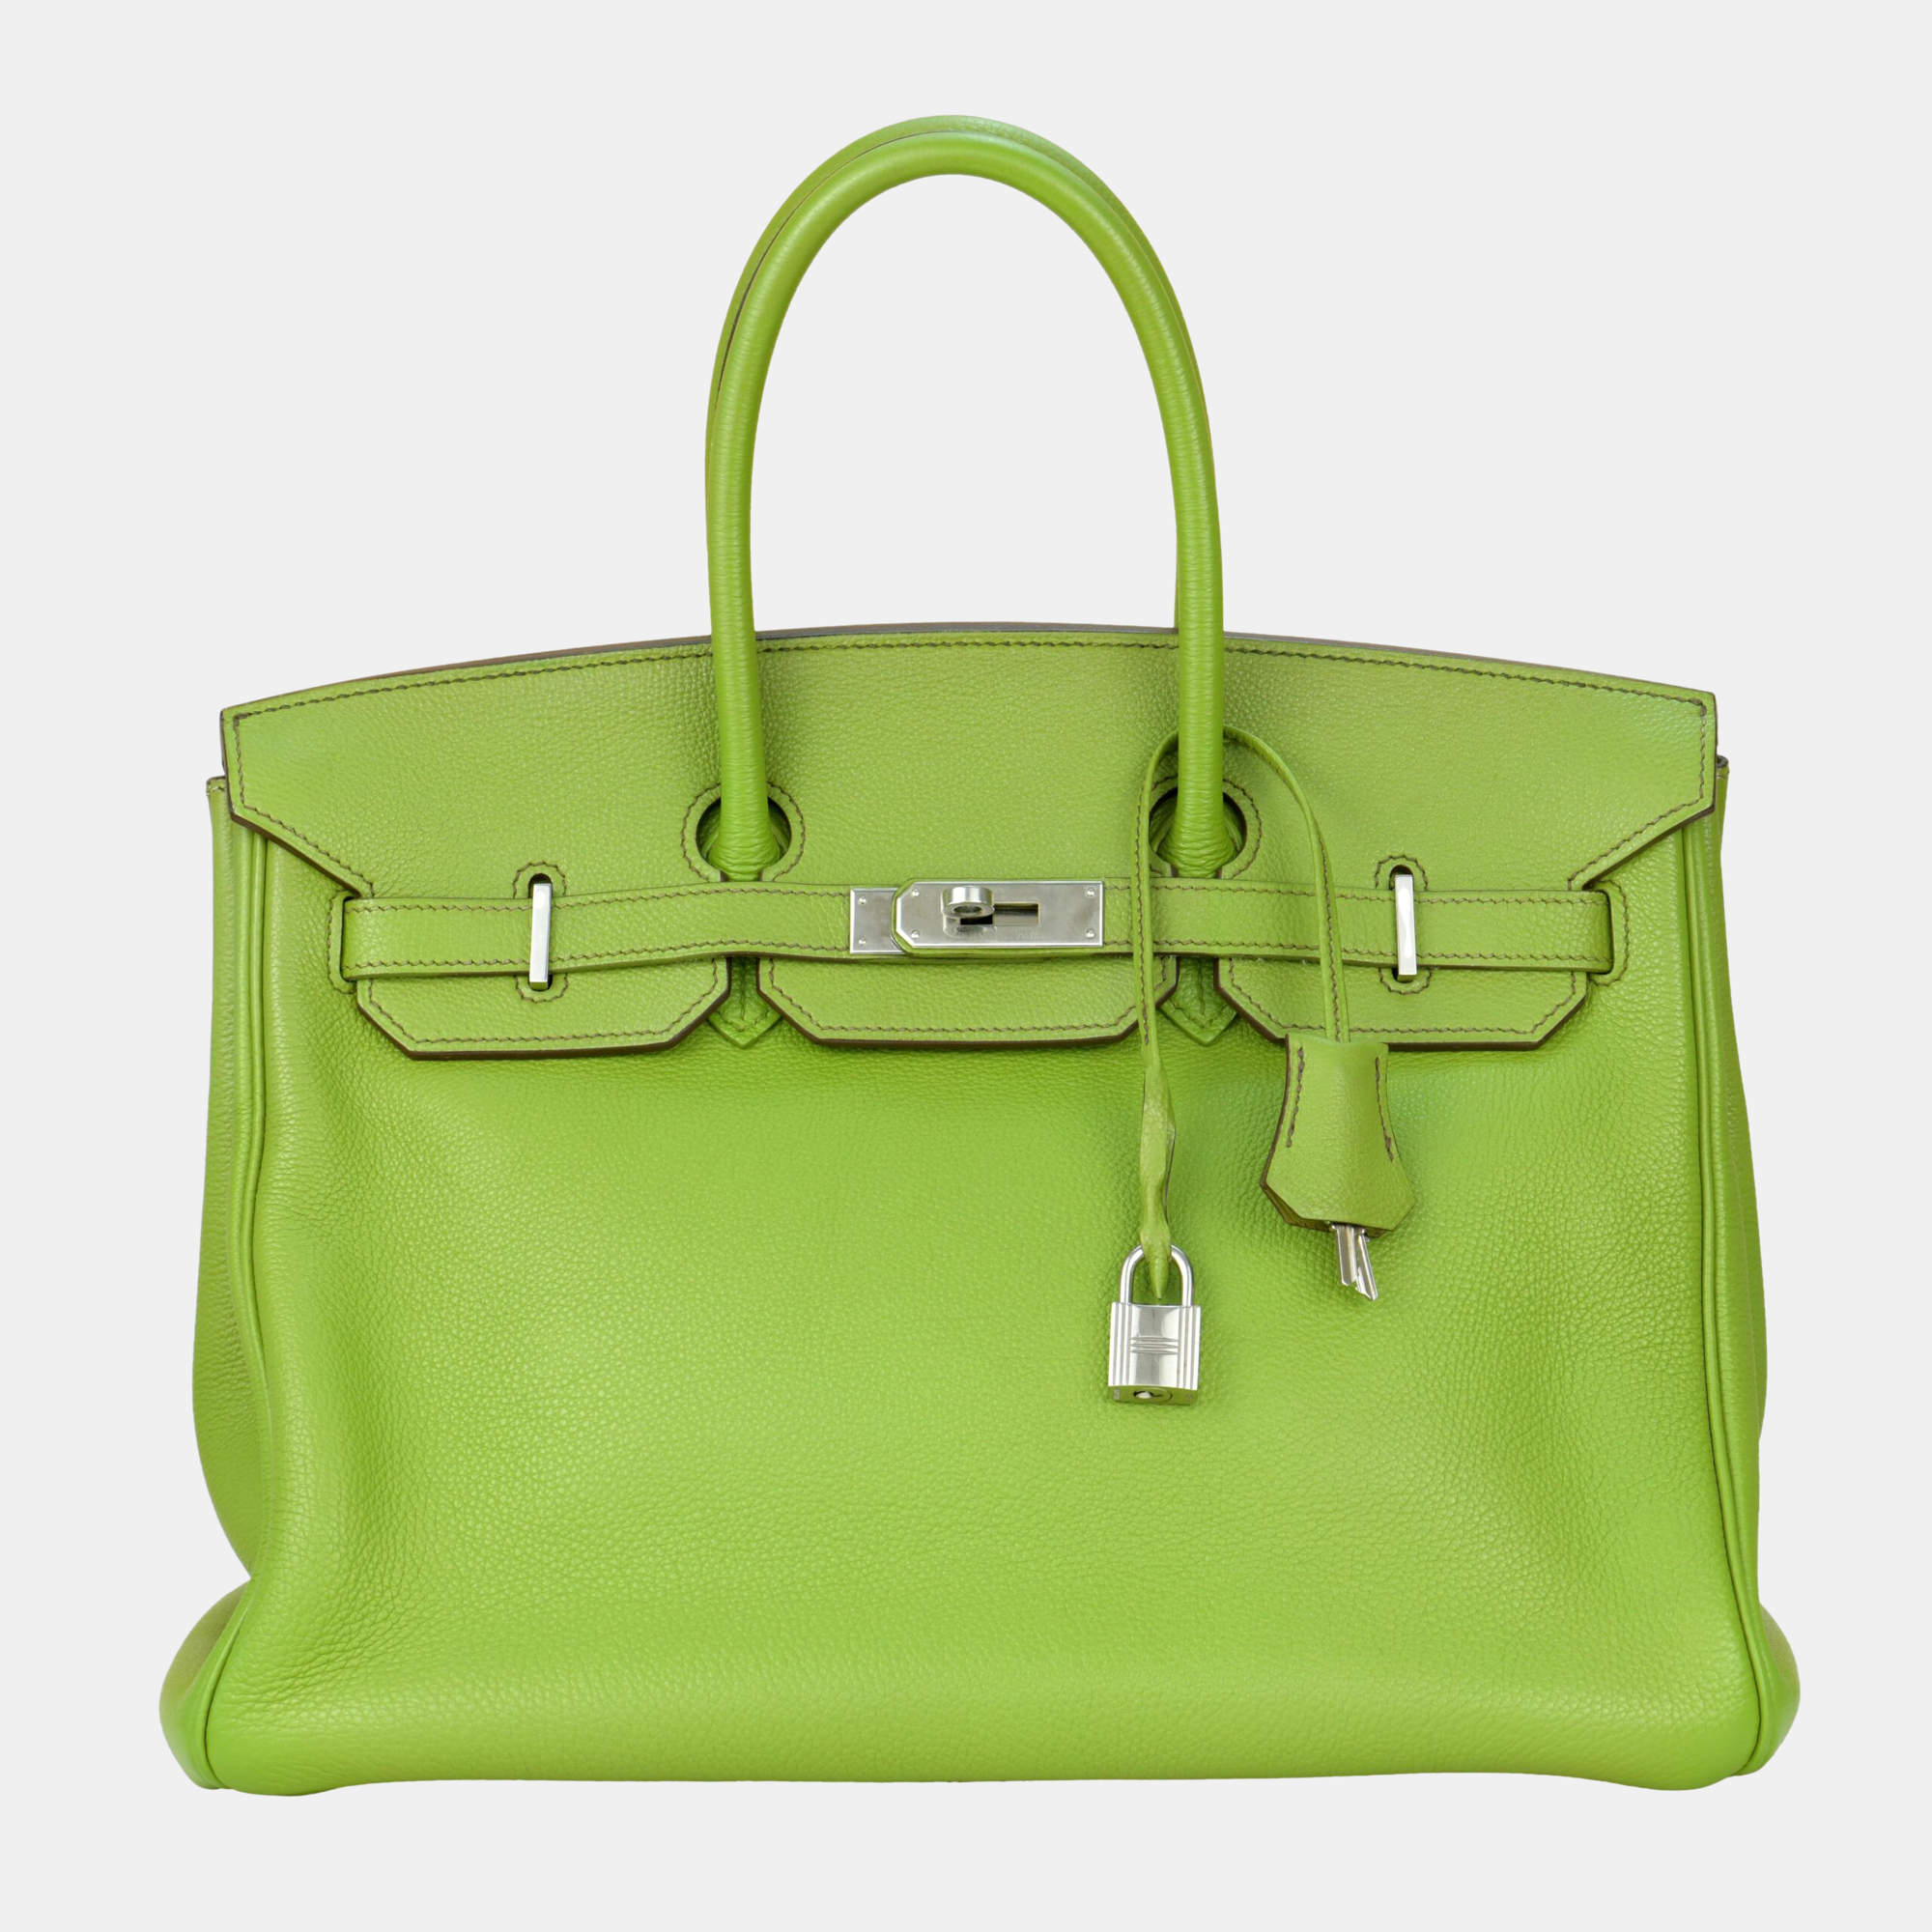 Hermes Anise Green Togo Leather Birkin 35cm with Silver Hardware